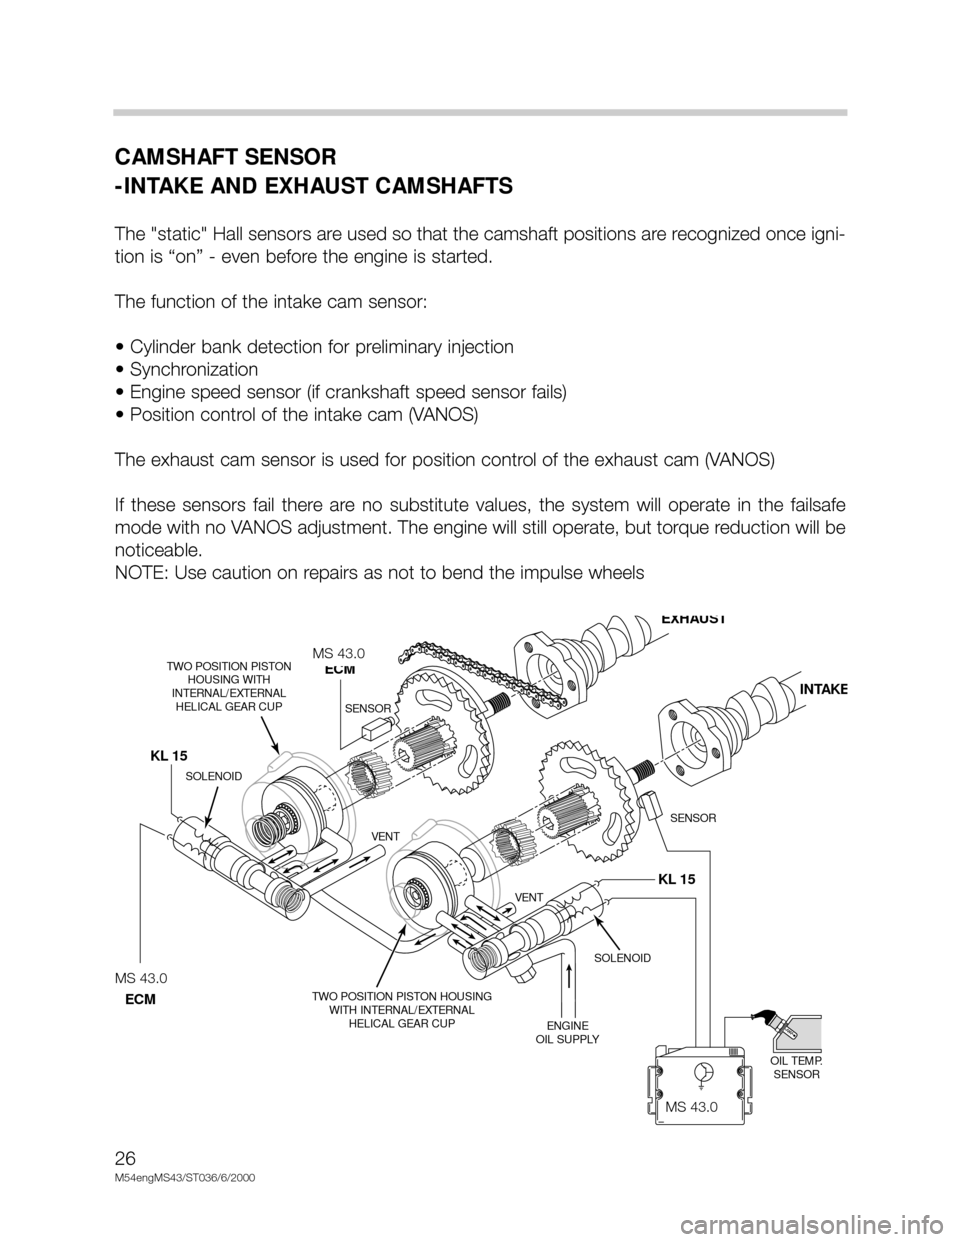 BMW X5 2005 E53 M54 Engine Owners Manual 26
M54engMS43/ST036/6/2000
CAMSHAFT SENSOR
-INTAKE AND EXHAUST CAMSHAFTS
The "static" Hall sensors are used so that the camshaft positions are recognized once igni-
tion is “on” - even before the 